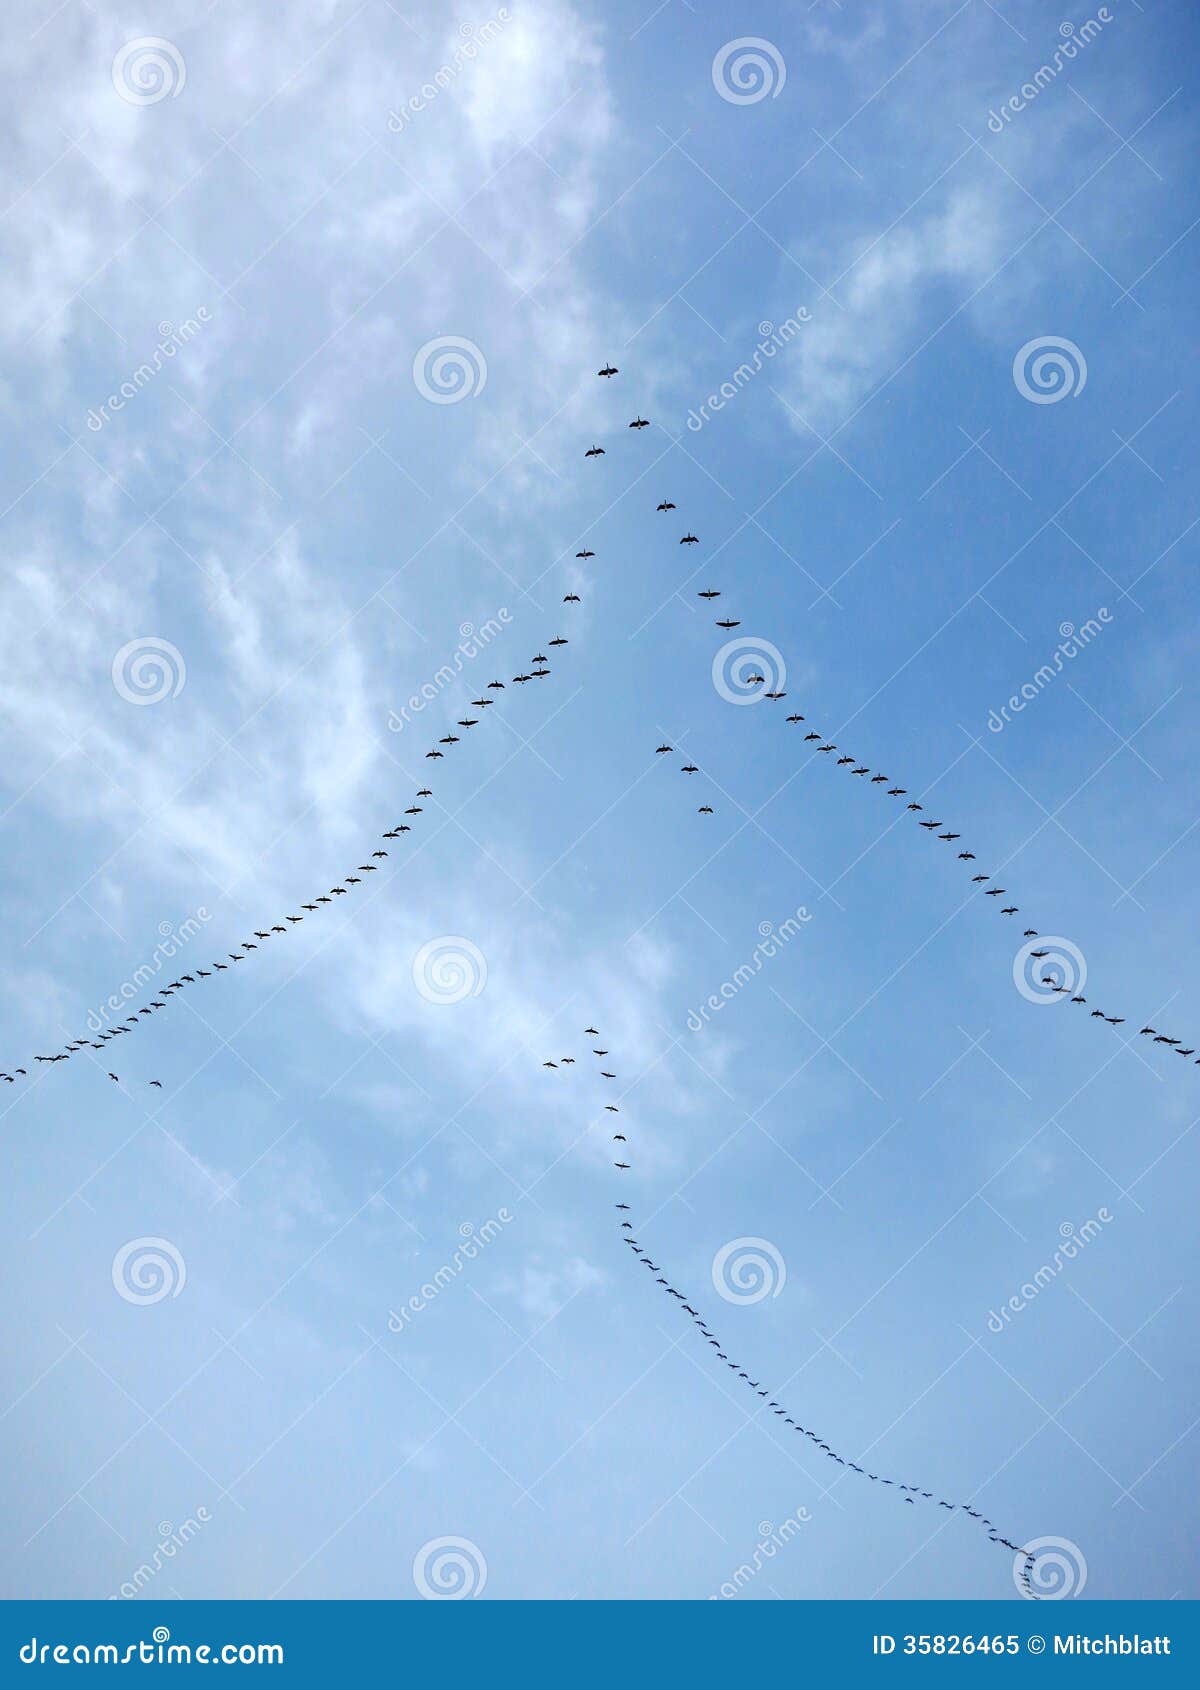 migratory birds flying in formation